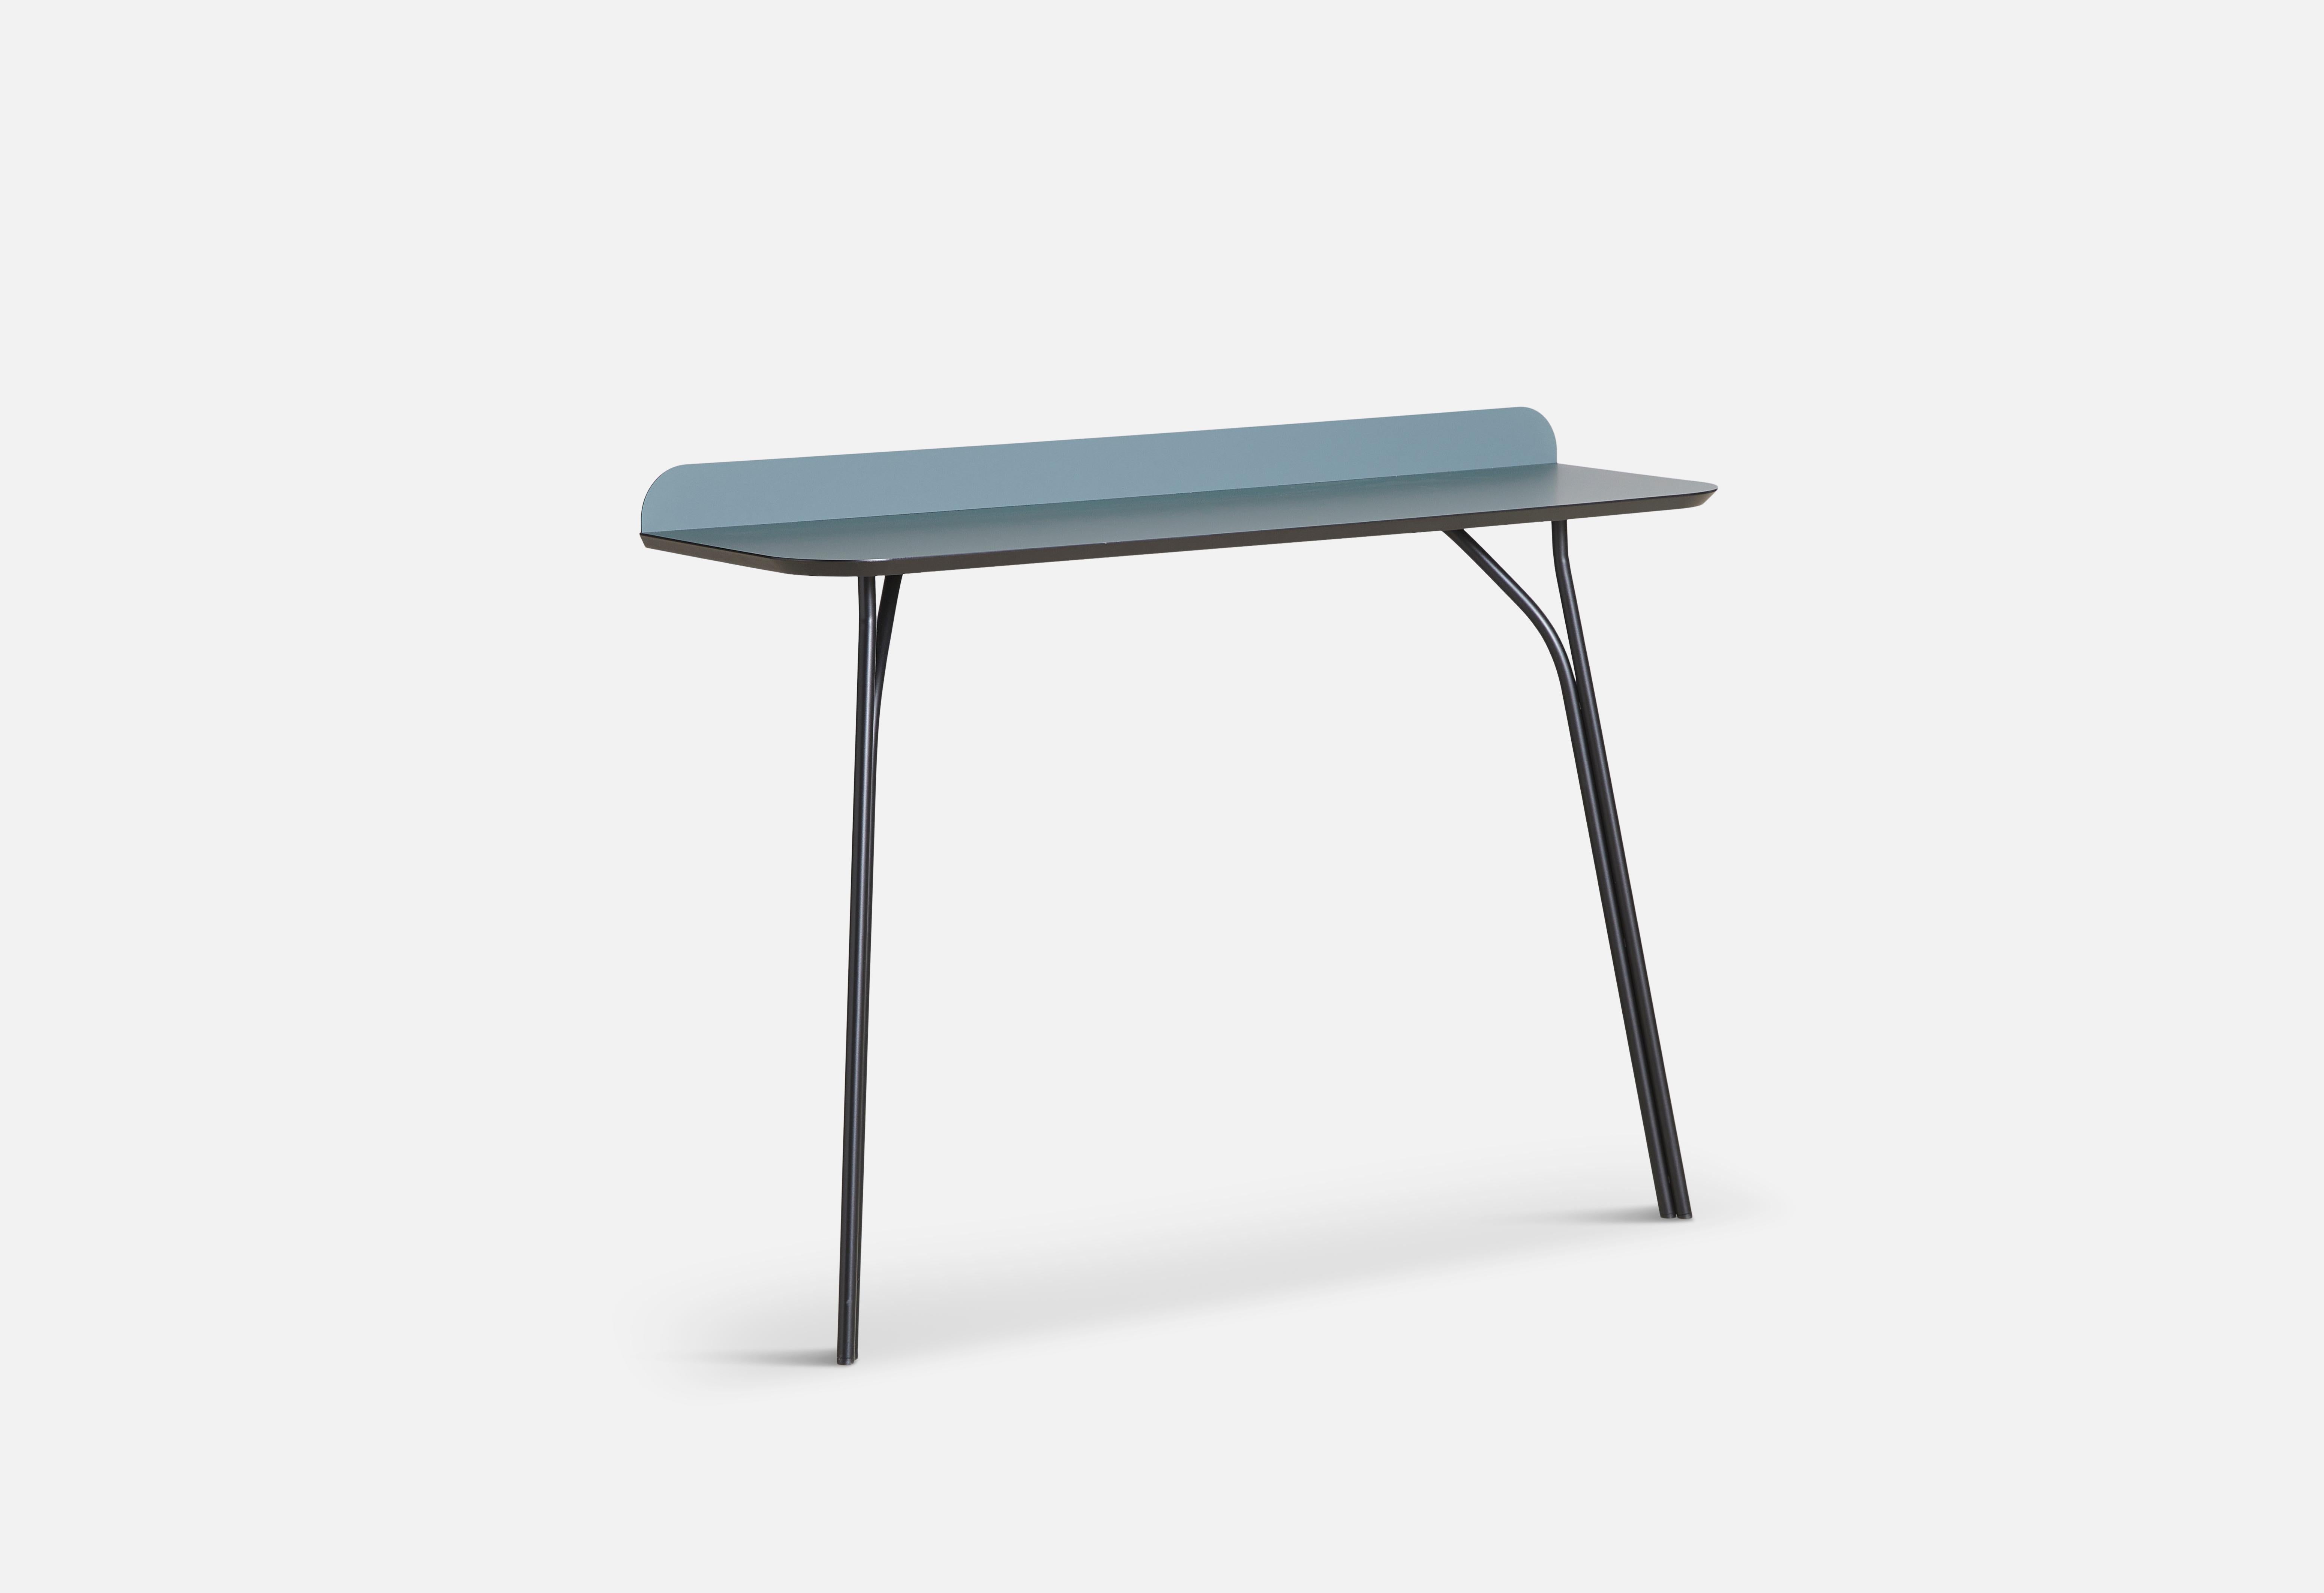 Verde Comodoro Tree Console Table by Elisabeth Hertzfeld  
Materials: Fenix Laminate, Metal  
Dimensions: D 40 x W 130 x H 96 cm
Also available in different sizes. Please contact us.

The founders, Mia and Torben Koed, decided to put their 30 years